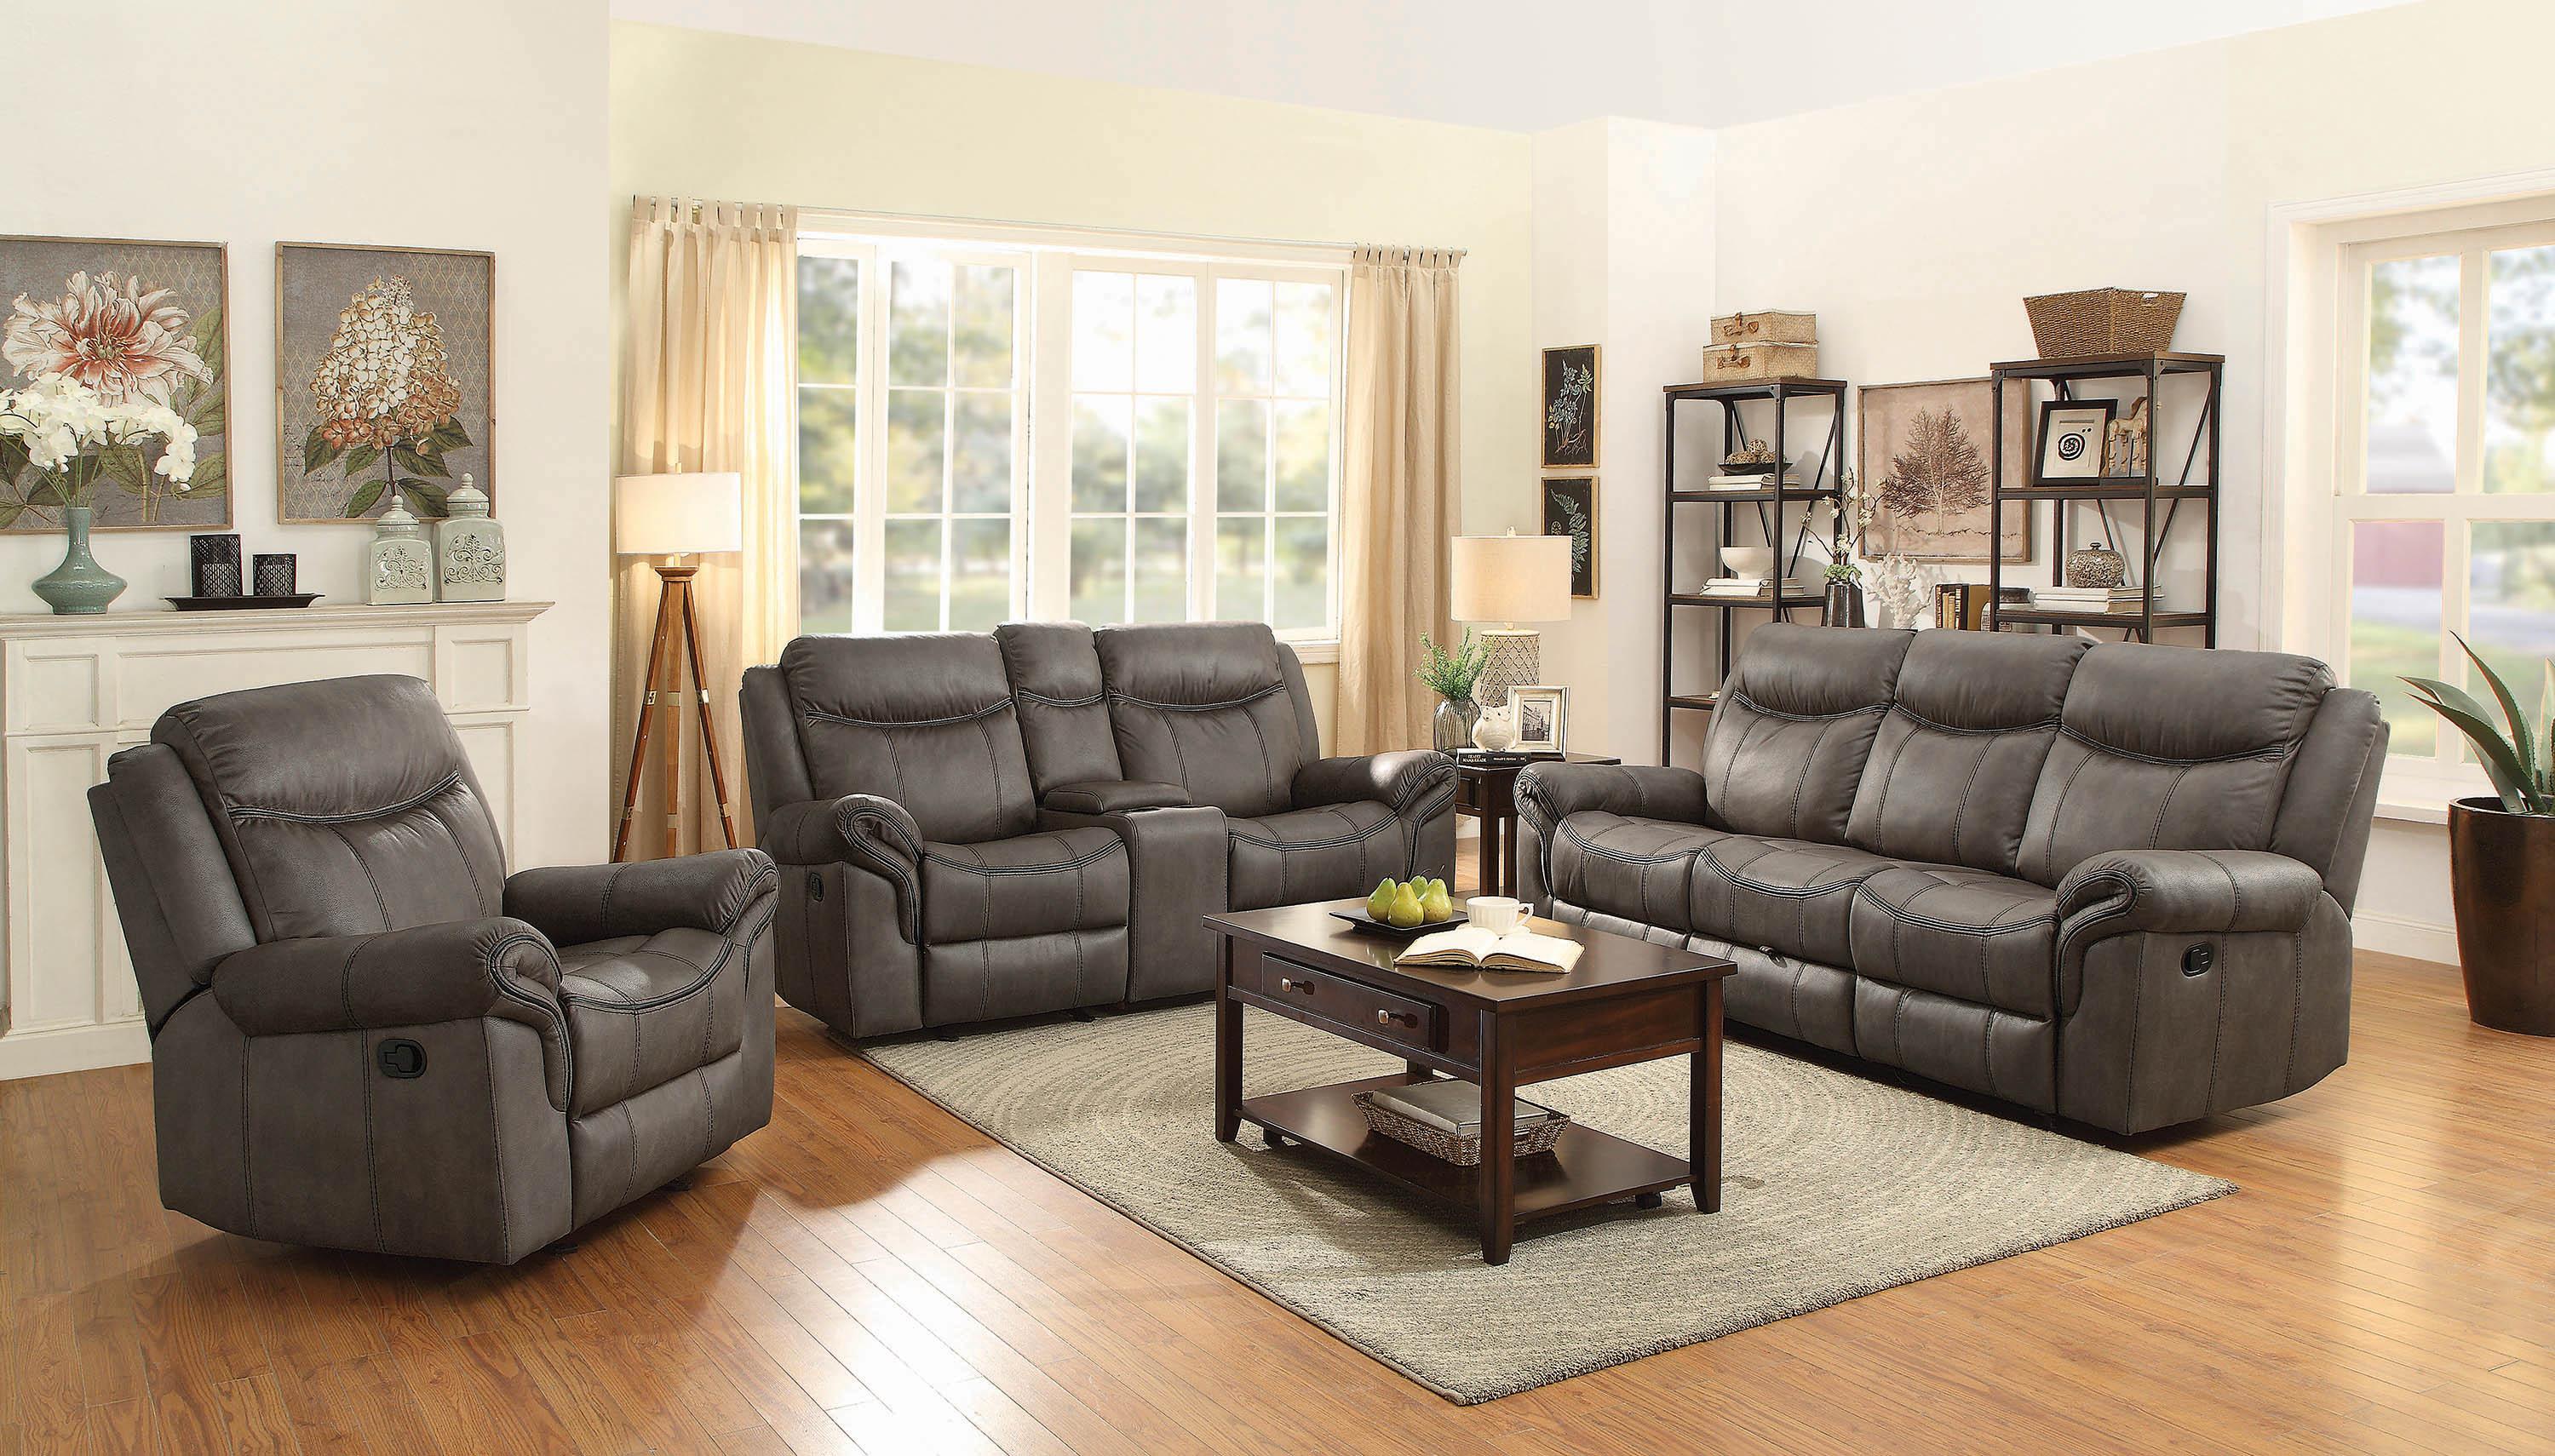 Transitional Motion Sofa Sawyer 602334 in Brown Fabric